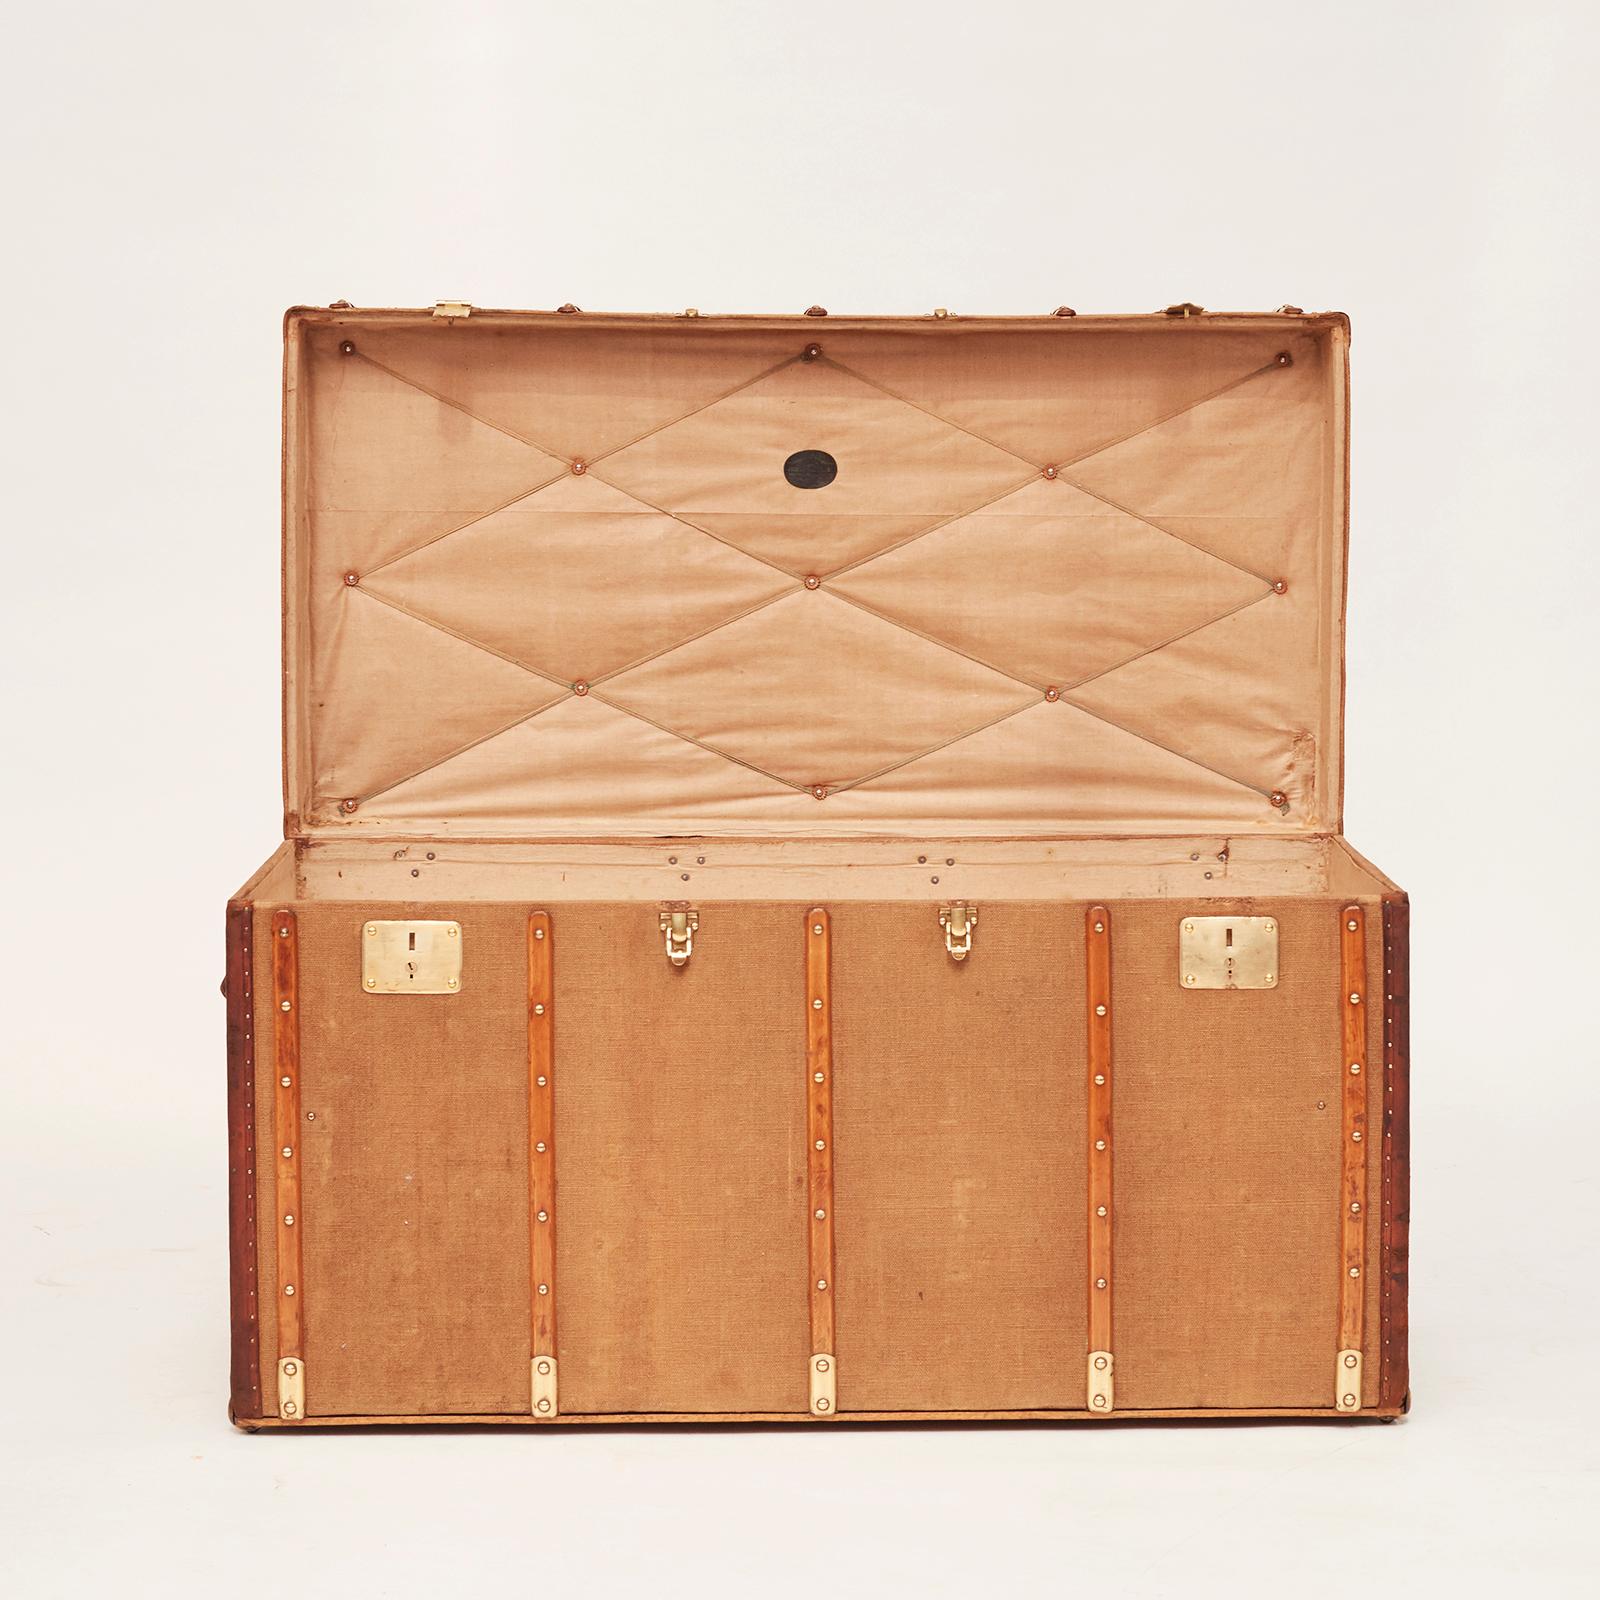 Travel suitcase, J.Nigst & Sohn. Vienna Austria. Approx. 1900. Made in wood, covered in canvas. Lined inside with fabric. Brass fittings. Appears in original condition. Sensibly refurbished.